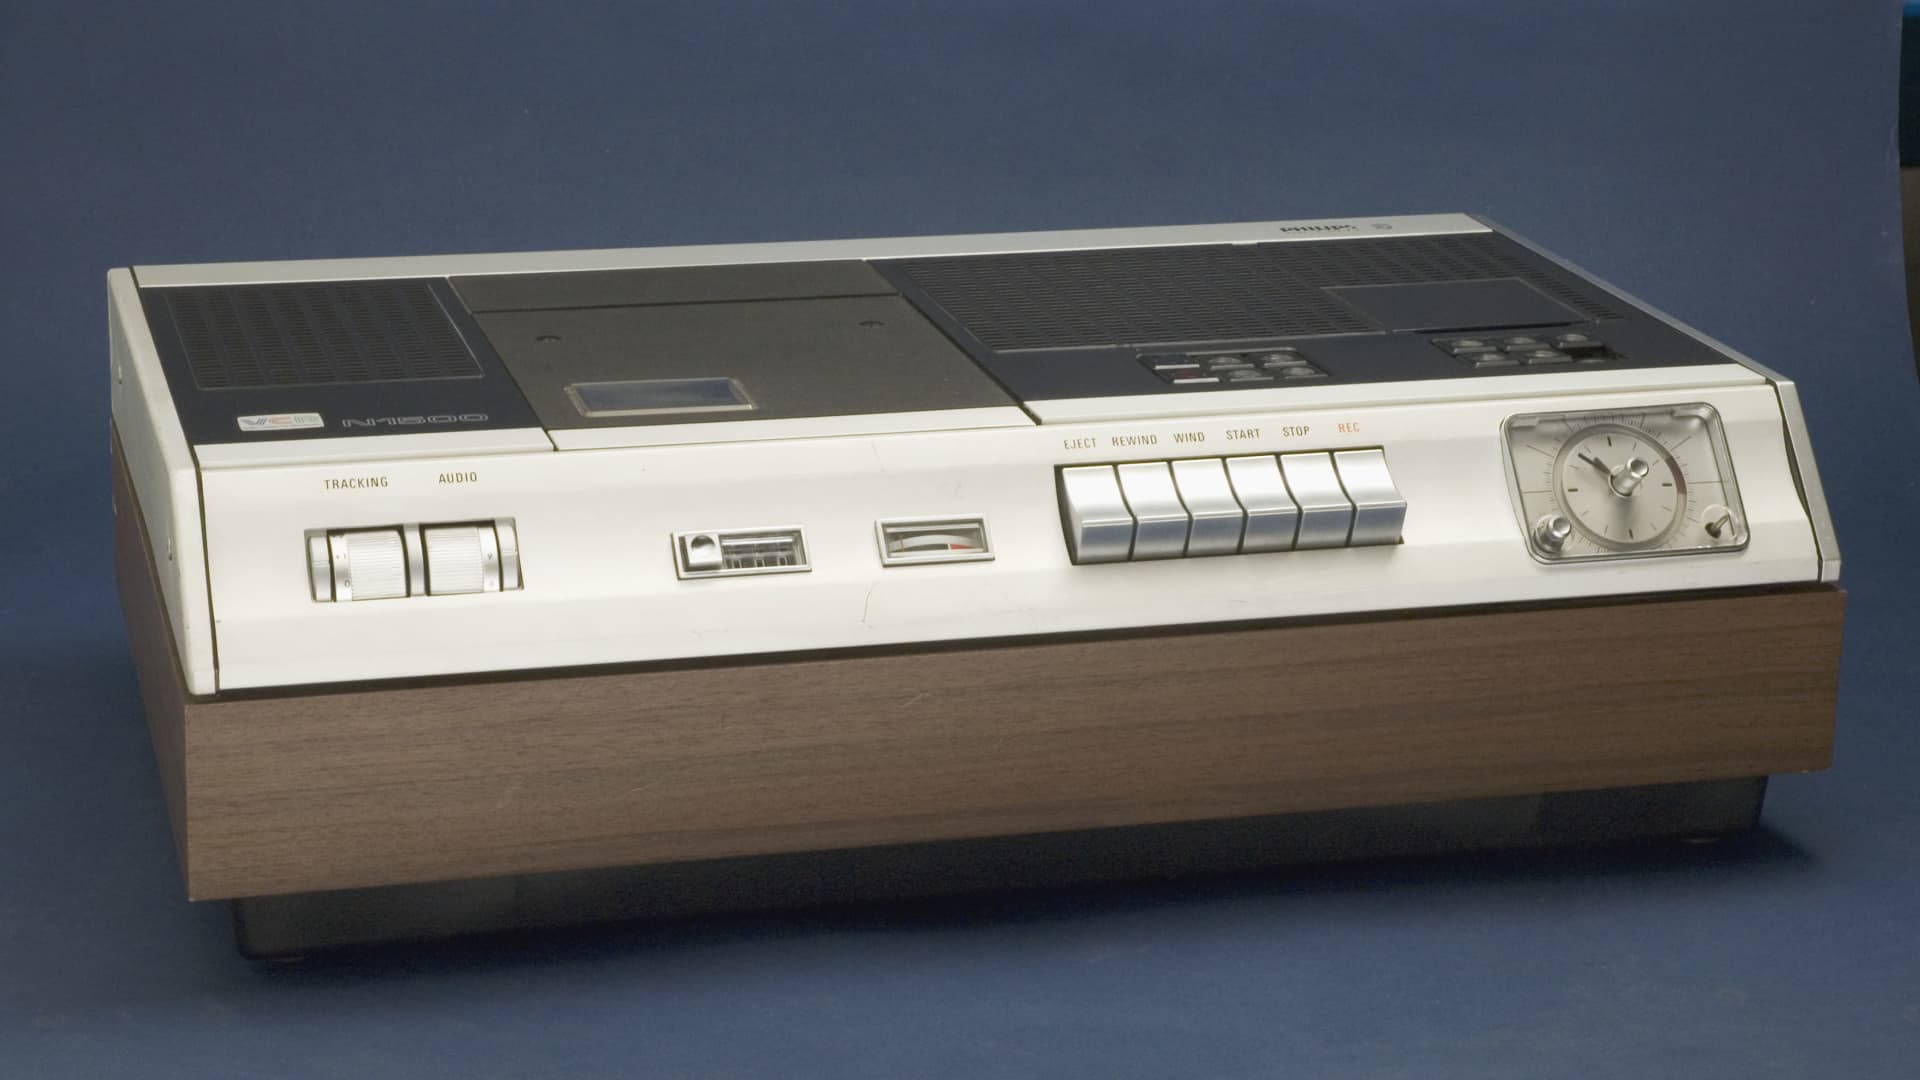 Launched in 1971, this was the first practical domestic video recorder. It had a built-in TV tuner and timer so you could set it to record whilst you were out and it was fully automatic in operation.